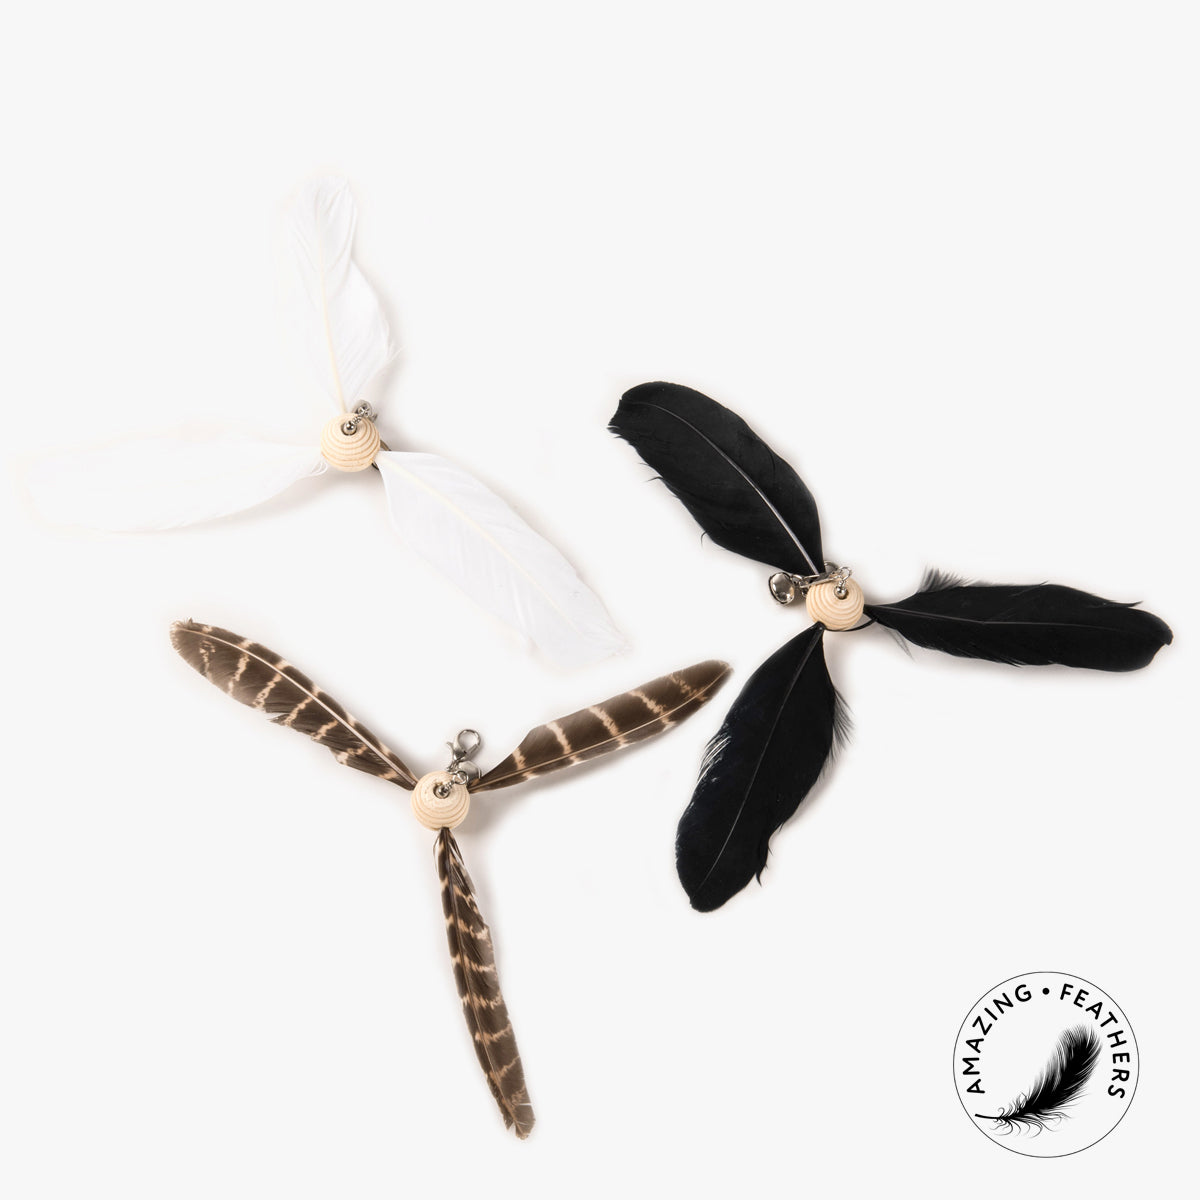 Profeline Propeller Cat Toy In White, Black & Patterned Feathers | at Made Moggie